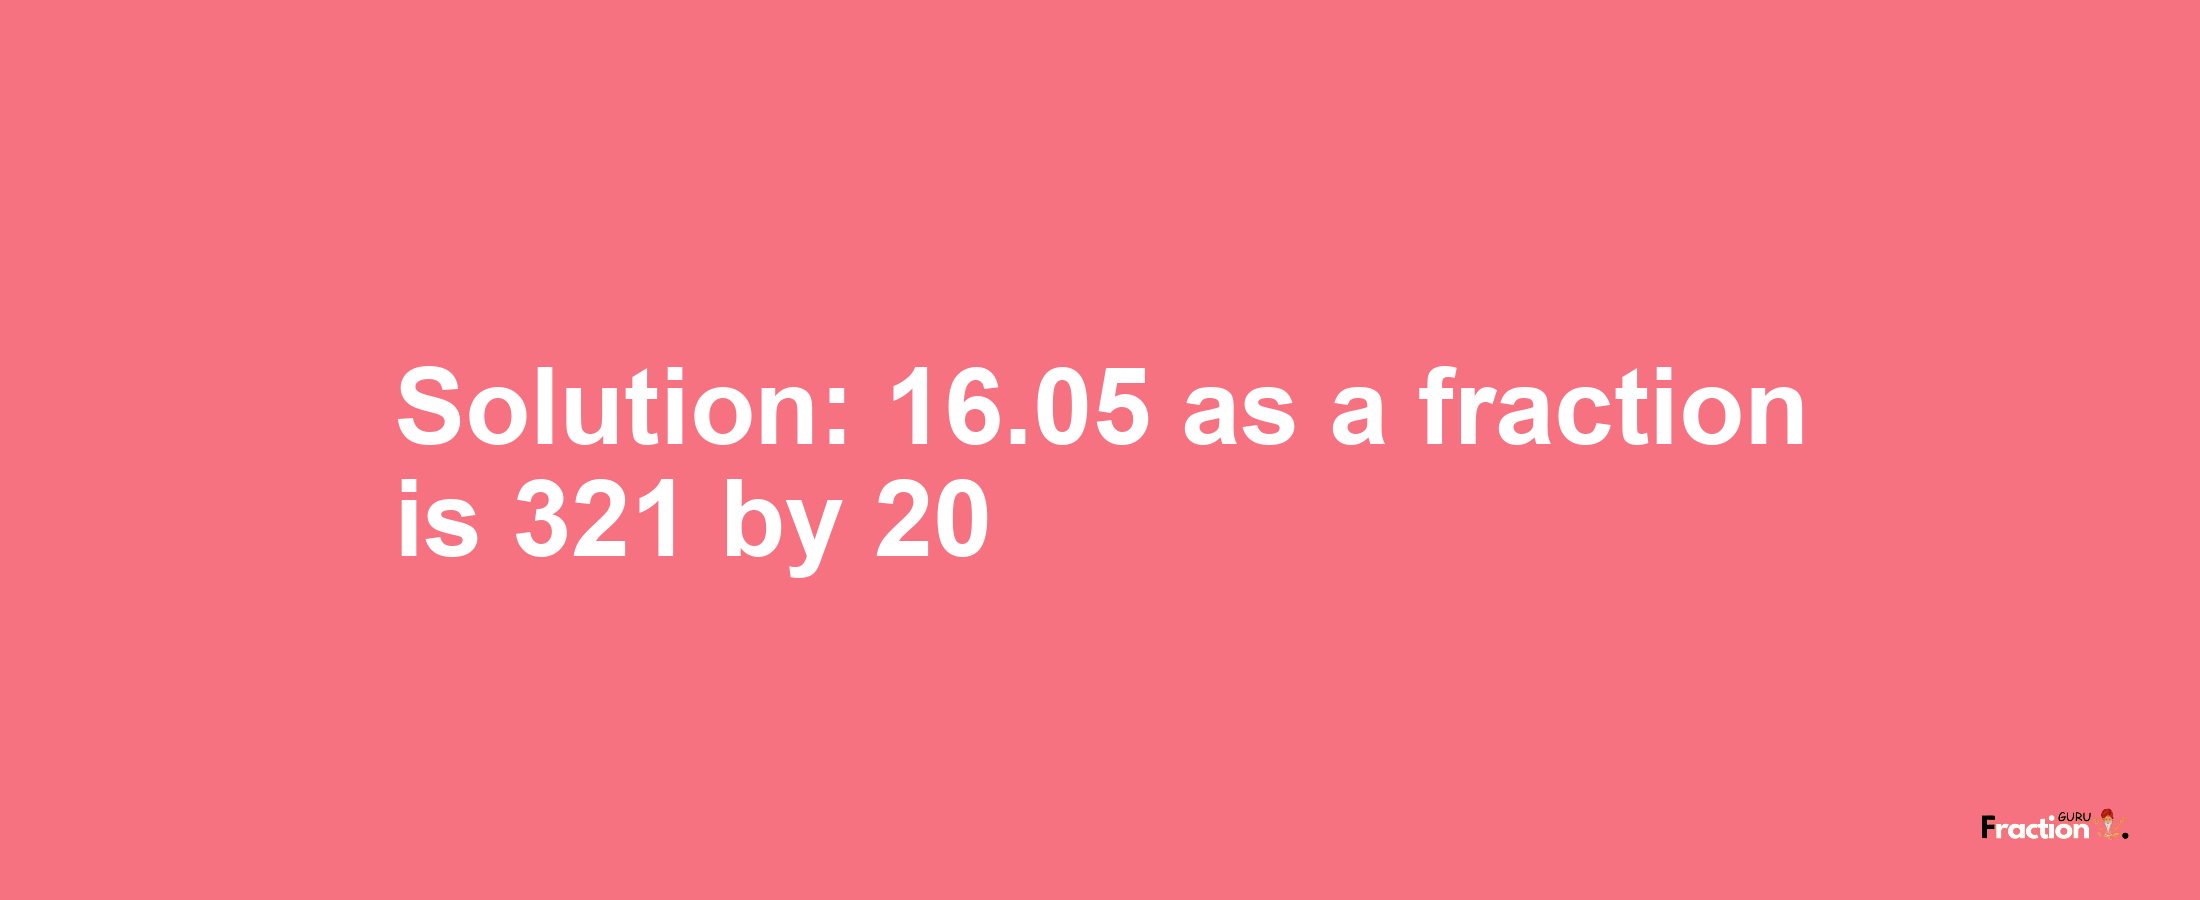 Solution:16.05 as a fraction is 321/20